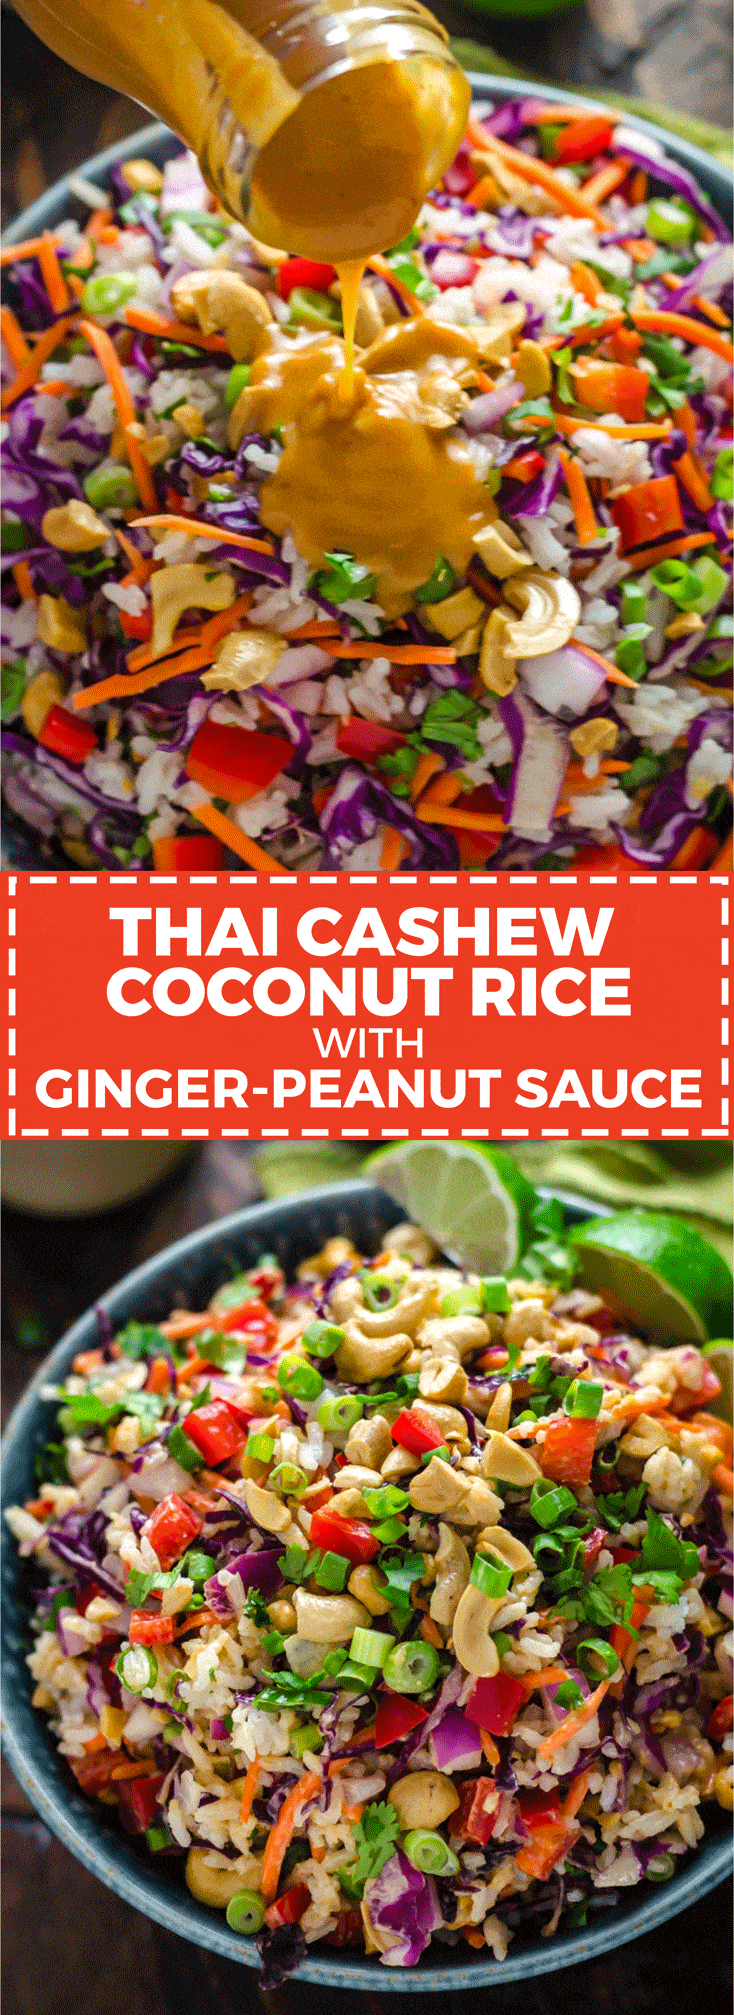 Thai Cashew Coconut Rice with Ginger Peanut Dressing. This rice salad is seriously addictive and always a huge hit at potlucks! Pasta salad is so overrated. Rice salad? I want it for every meal. | hostthetoast.com